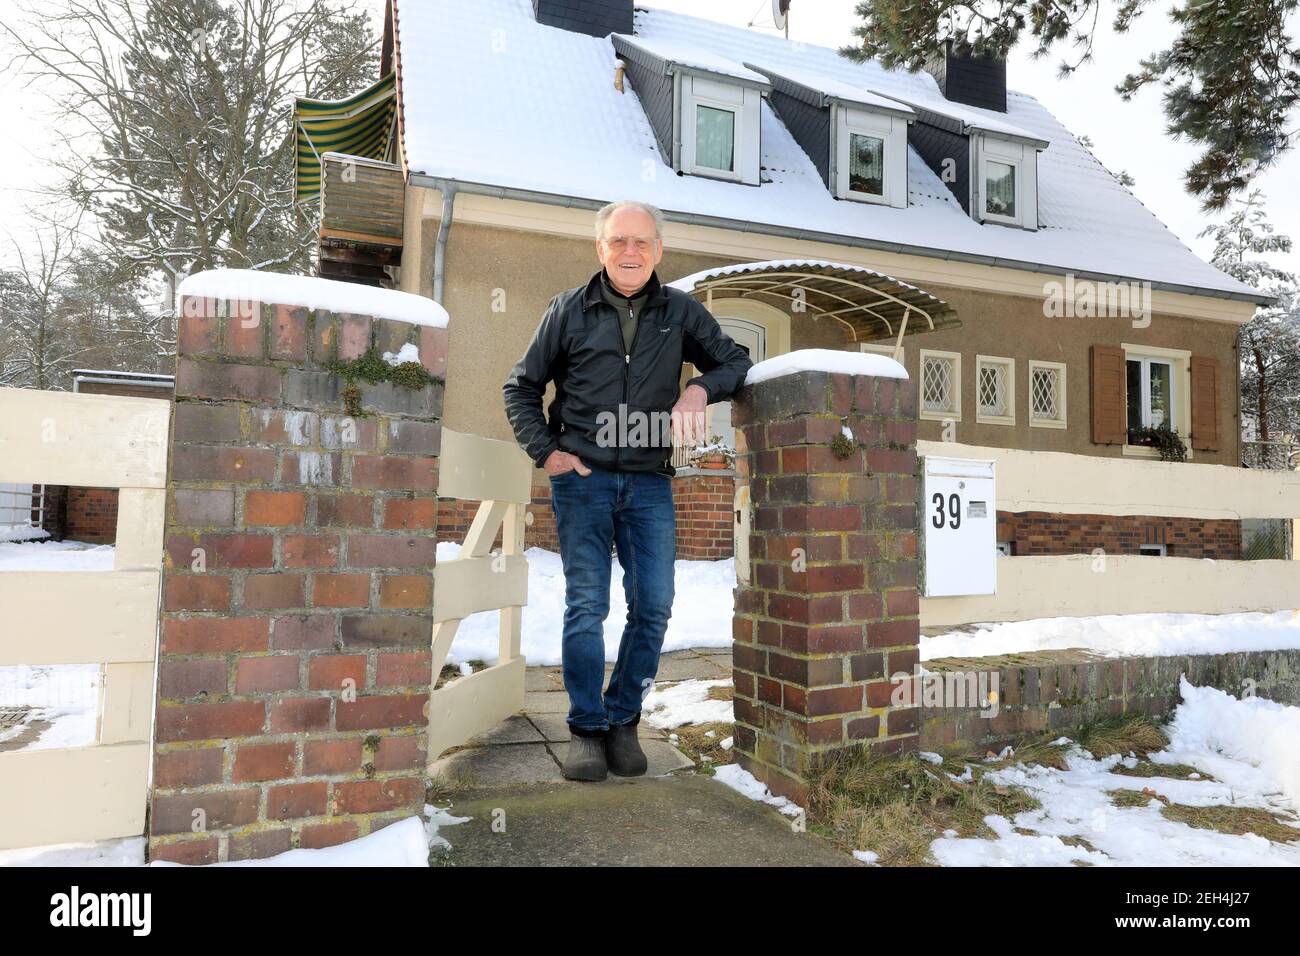 01 February 2021, Saxony-Anhalt, Heyrothsberge: Cycling legend Gustav-Adolf Schur stands in front of his house in Heyrothsberge. Schur will be 90 years old on 23.02.2021. In his active time, 'Täve' triggered true storms of enthusiasm. Millions of people lined the streets when the nine-time GDR Sportsman of the Year and his team colleagues roared past on their racing bikes. Between 1950 and 1964, he celebrated successes that were unique in amateur sport. In 1955, the Heyrothsberg native became the first German rider to win the prestigious Peace Tour. Photo: Peter Gercke/dpa-Zentralbild/ZB Stock Photo